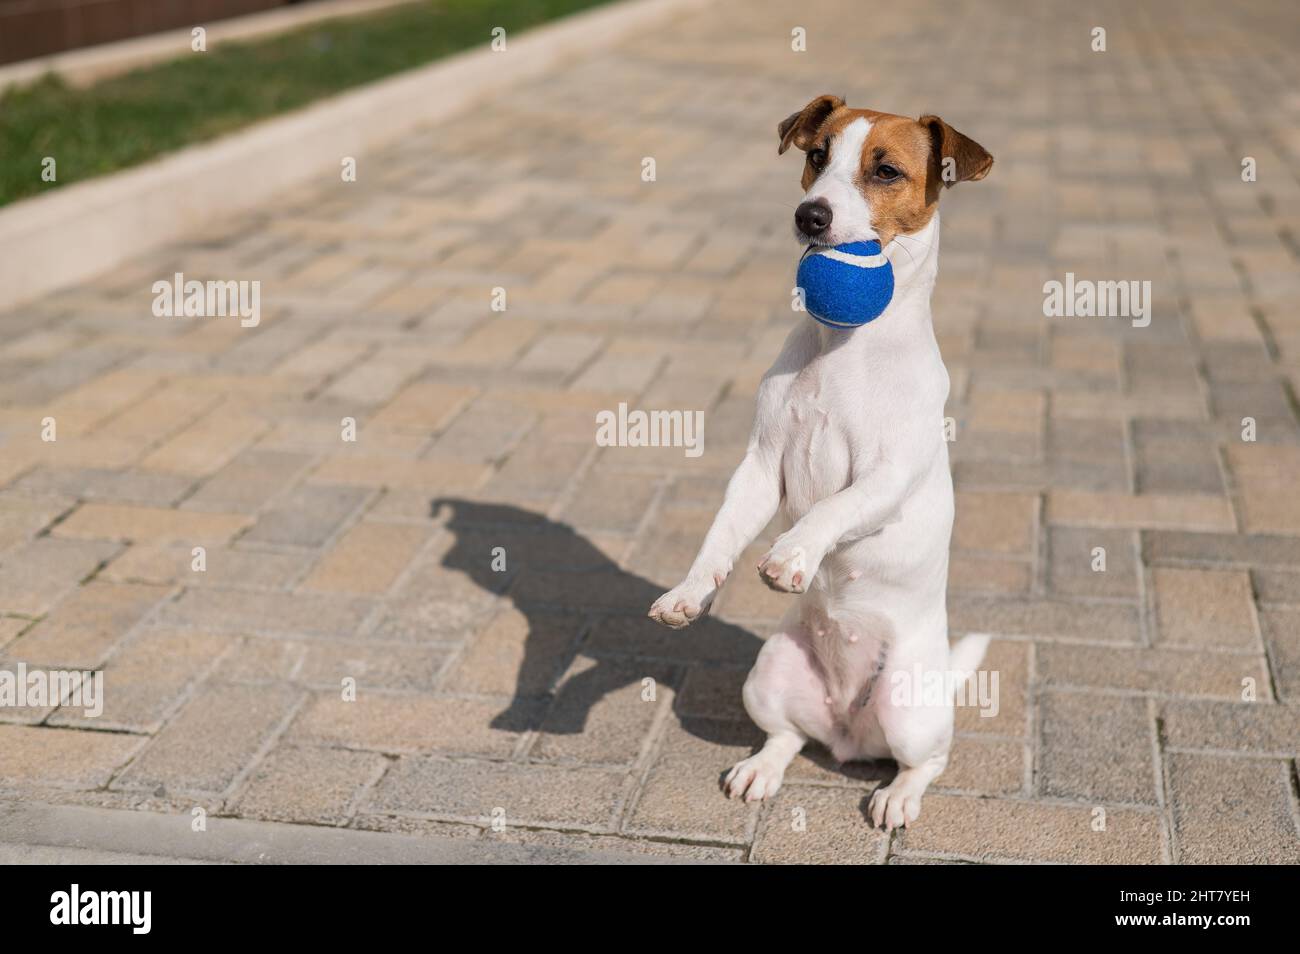 Jack russell terrier dog holding a ball in his teeth outdoors. Stock Photo